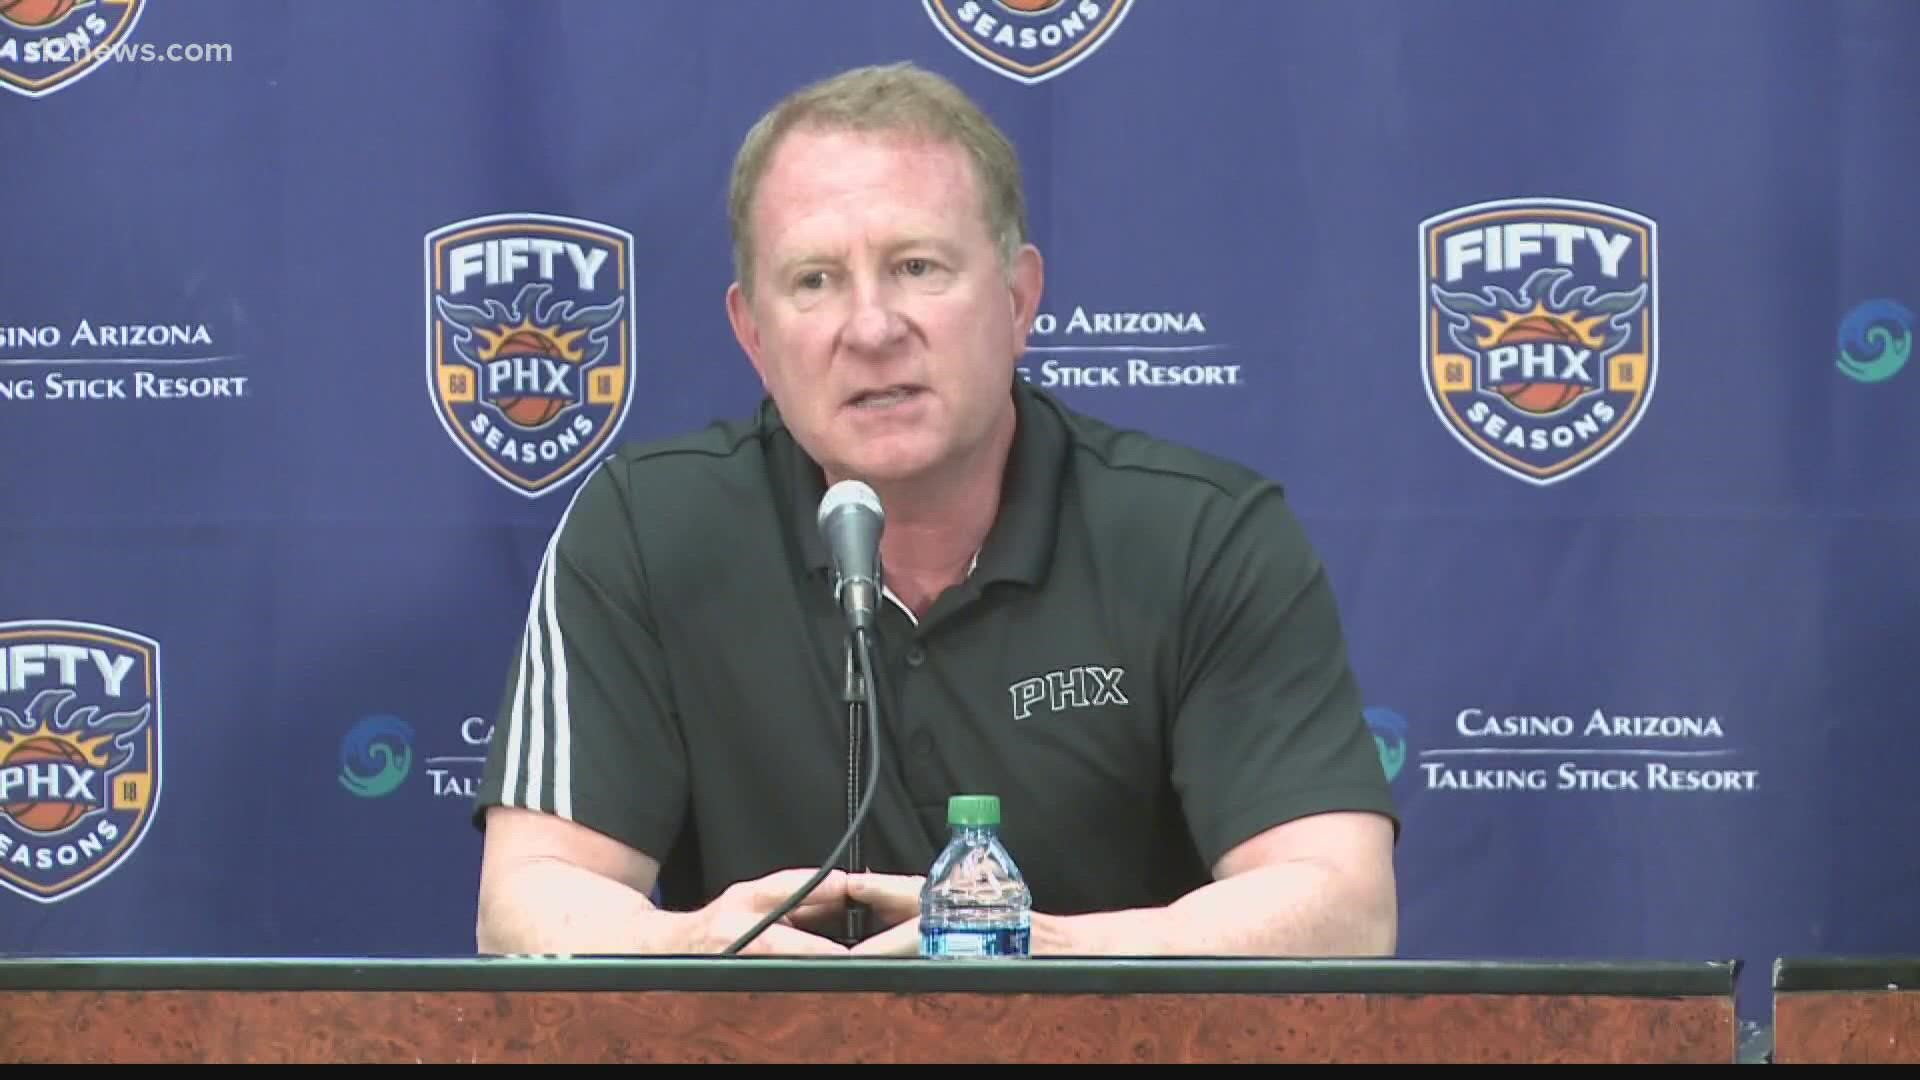 Three former Suns employees described messages they received from Penny Sarver, wife of Robert Sarver, as intimidating and unsettling.